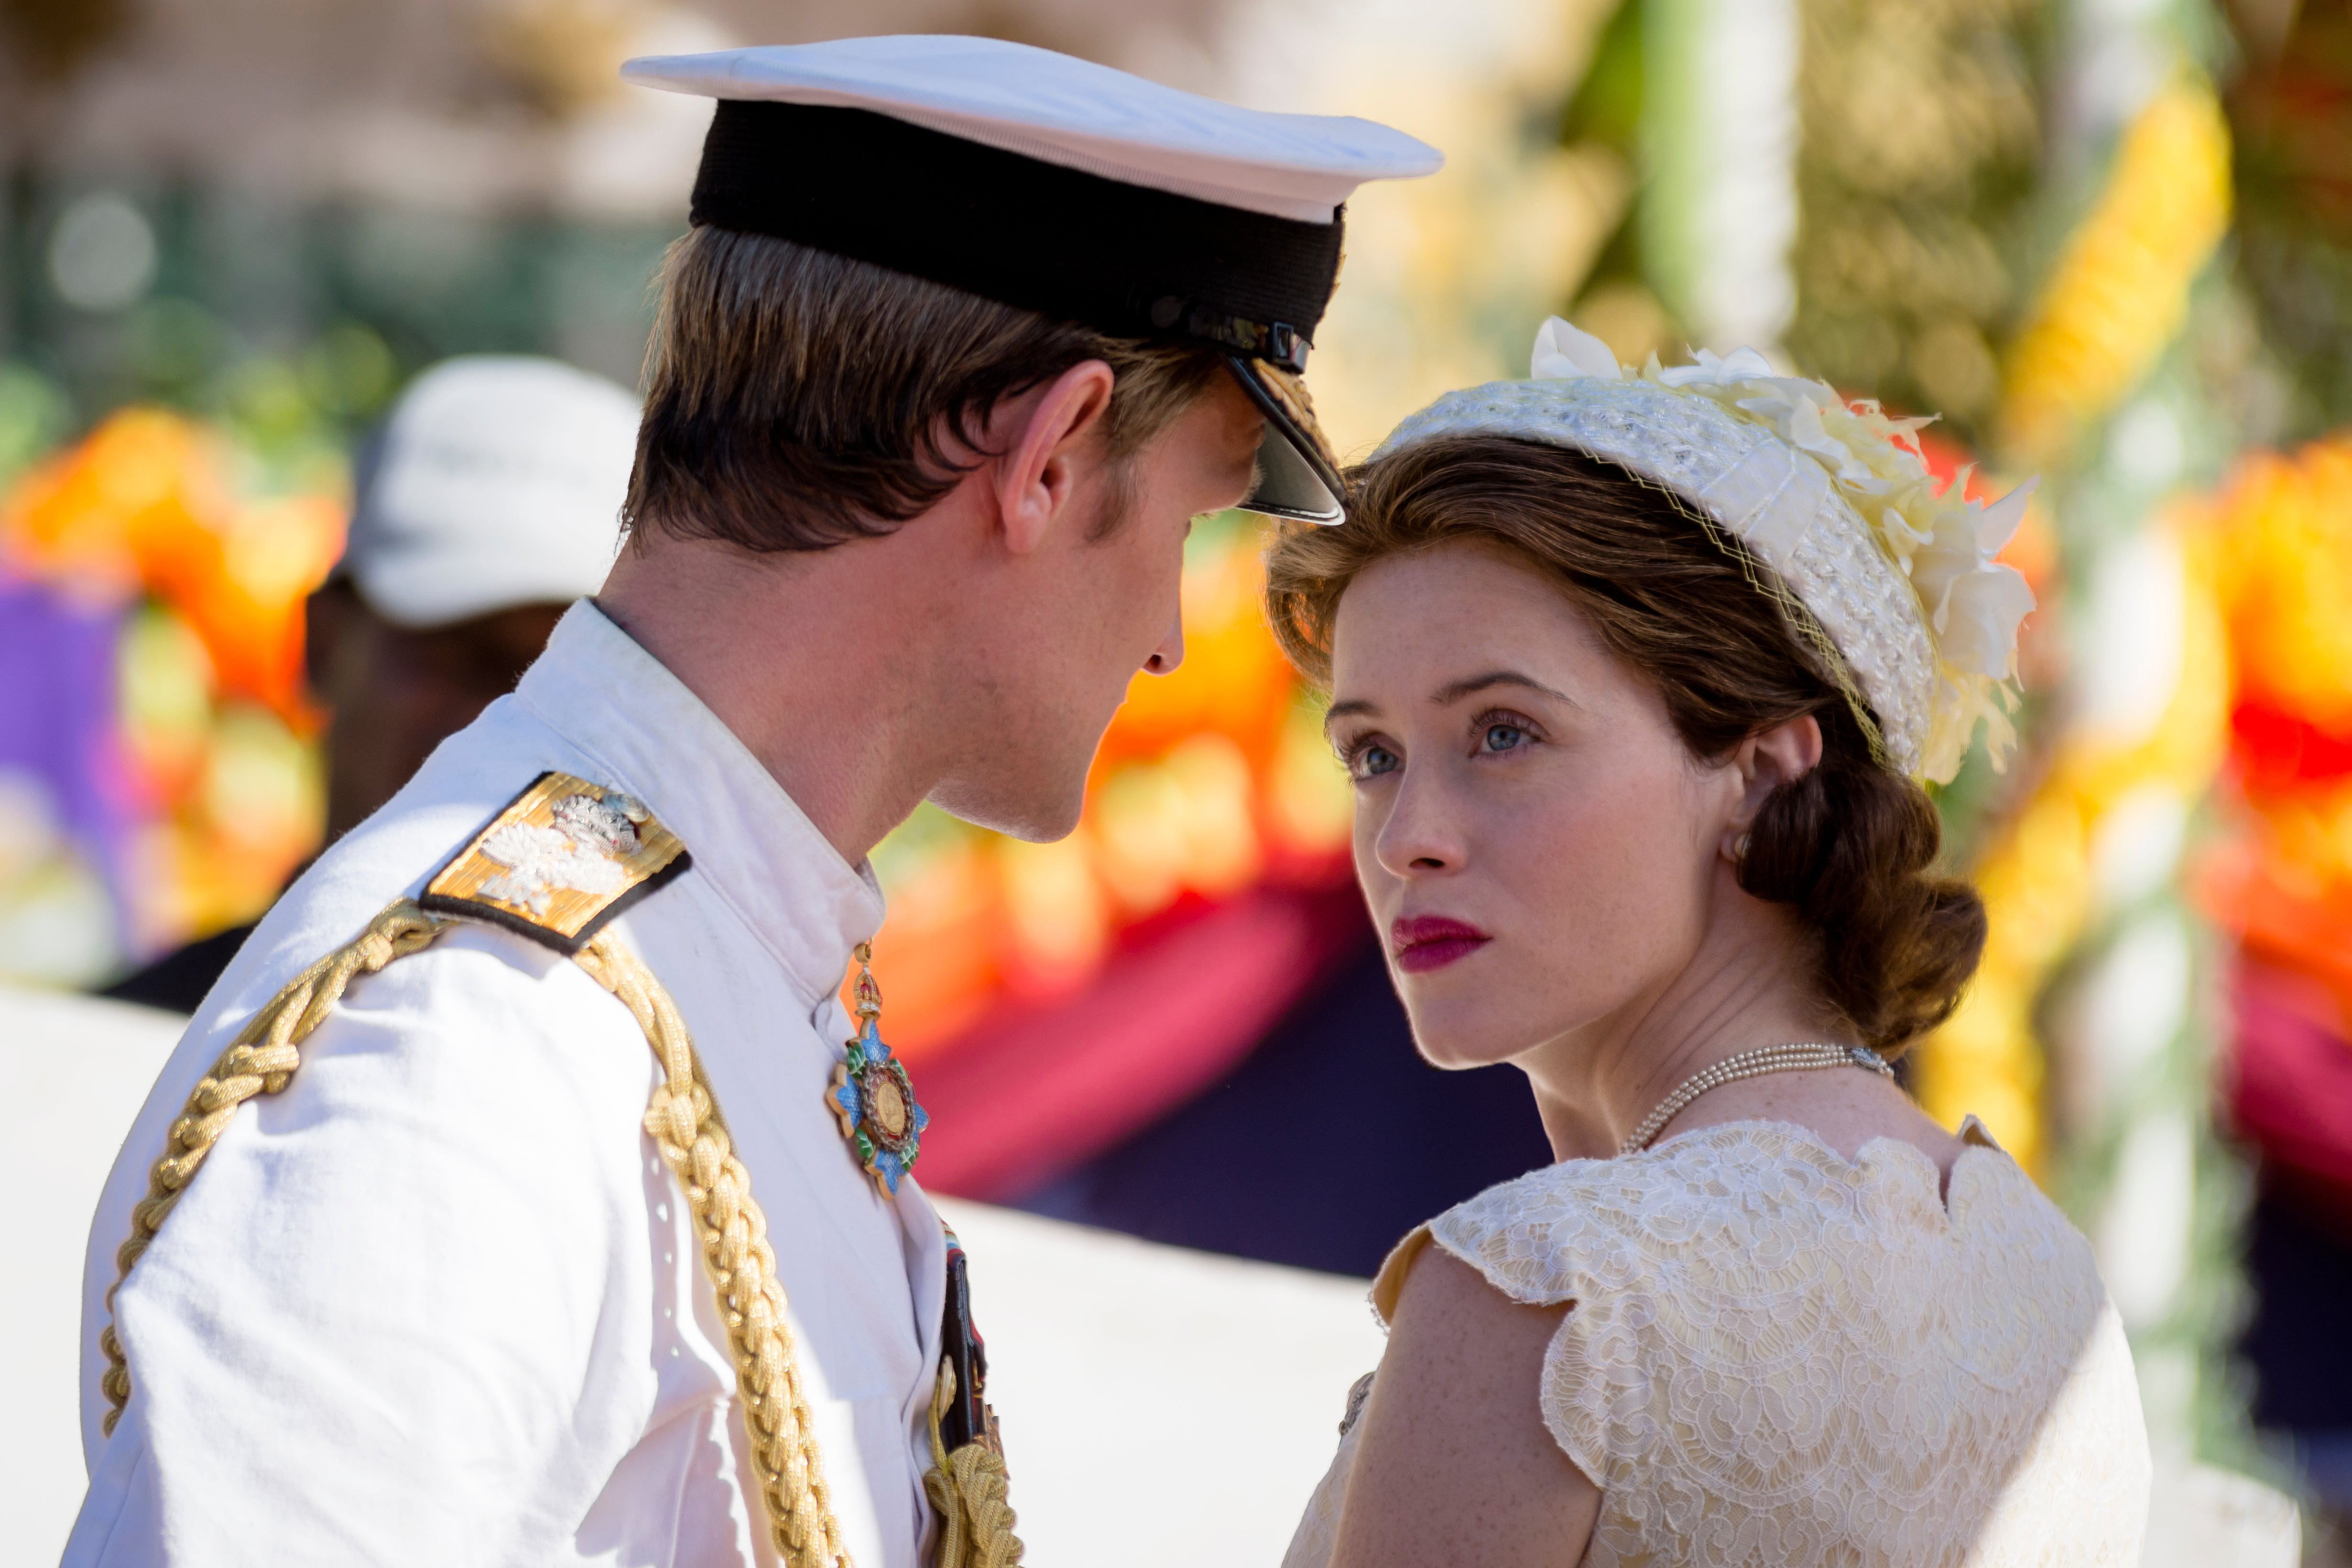 Matt Smith and Claire Foy stare into each others' eyes, not smiling, in The Crown.